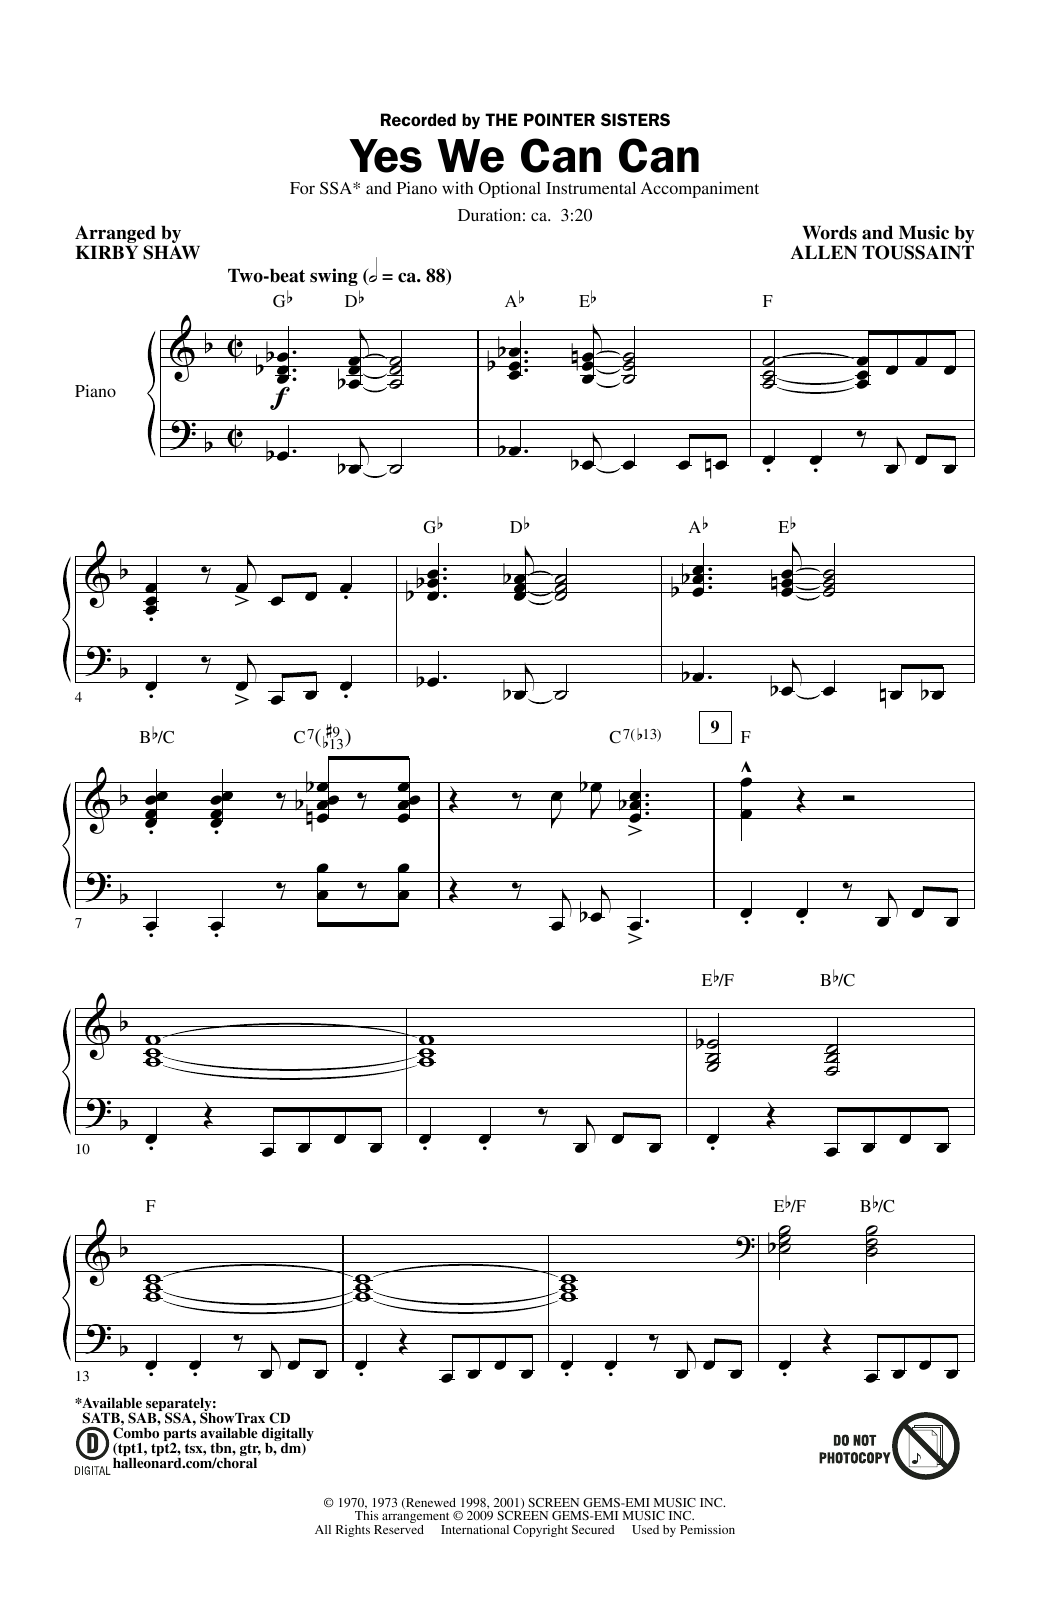 Download The Pointer Sisters Yes We Can Can (arr. Kirby Shaw) Sheet Music